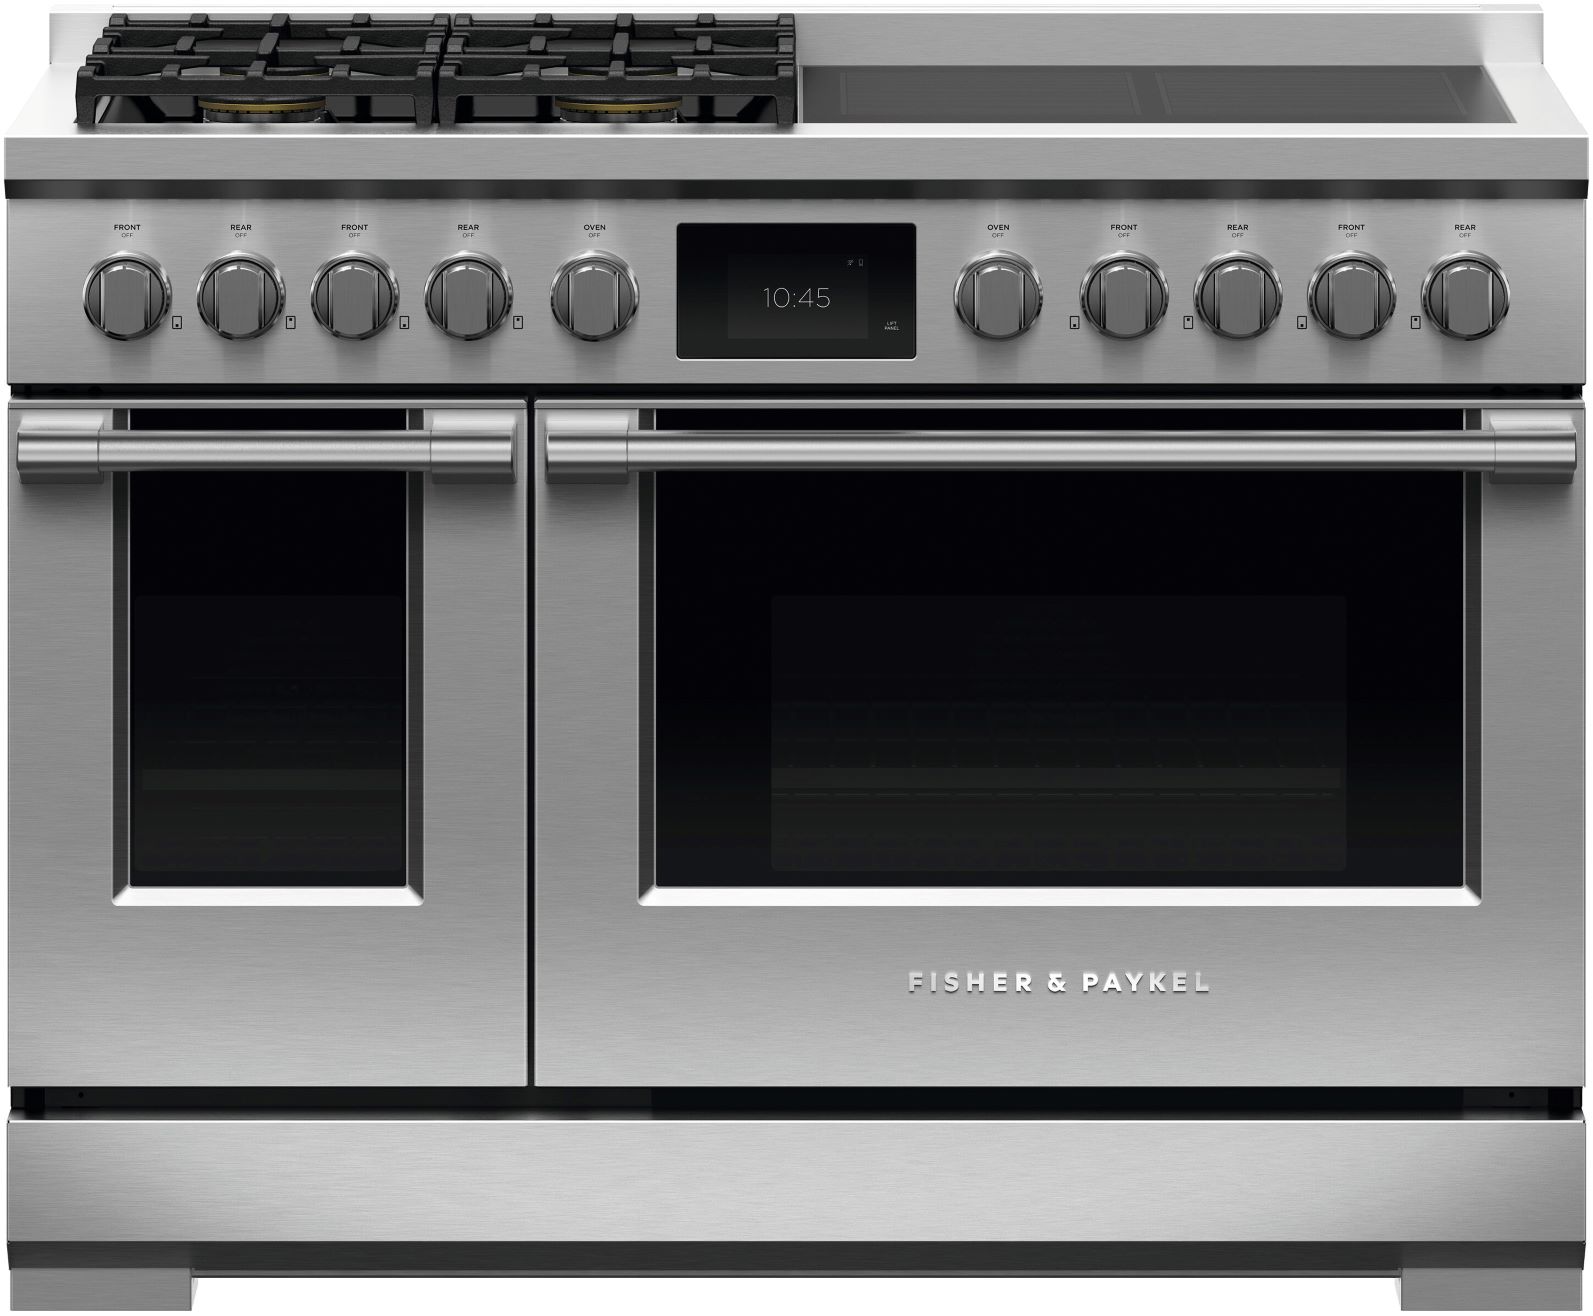 Luxury appliances include the Fisher & Paykel Series 11 48-inch Dual Fuel Range